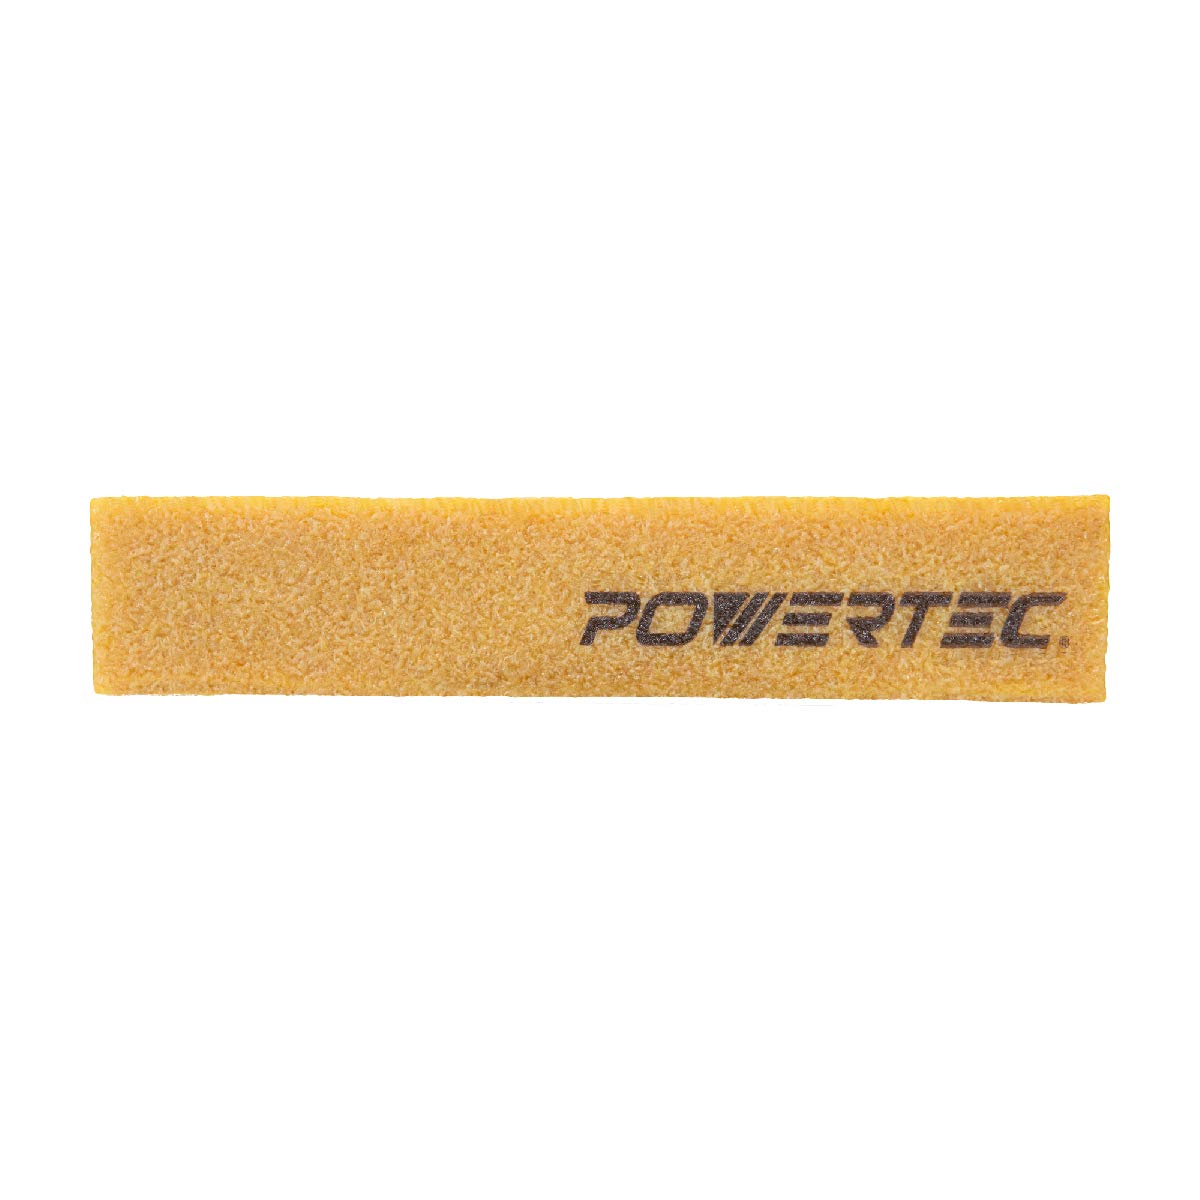 POWERTEC 71002-P2 Abrasive Cleaning Stick for Sanding Belts & Discs | Natural Rubber Eraser - Woodworking Shop Tools for Sanding Perfection, 2PK